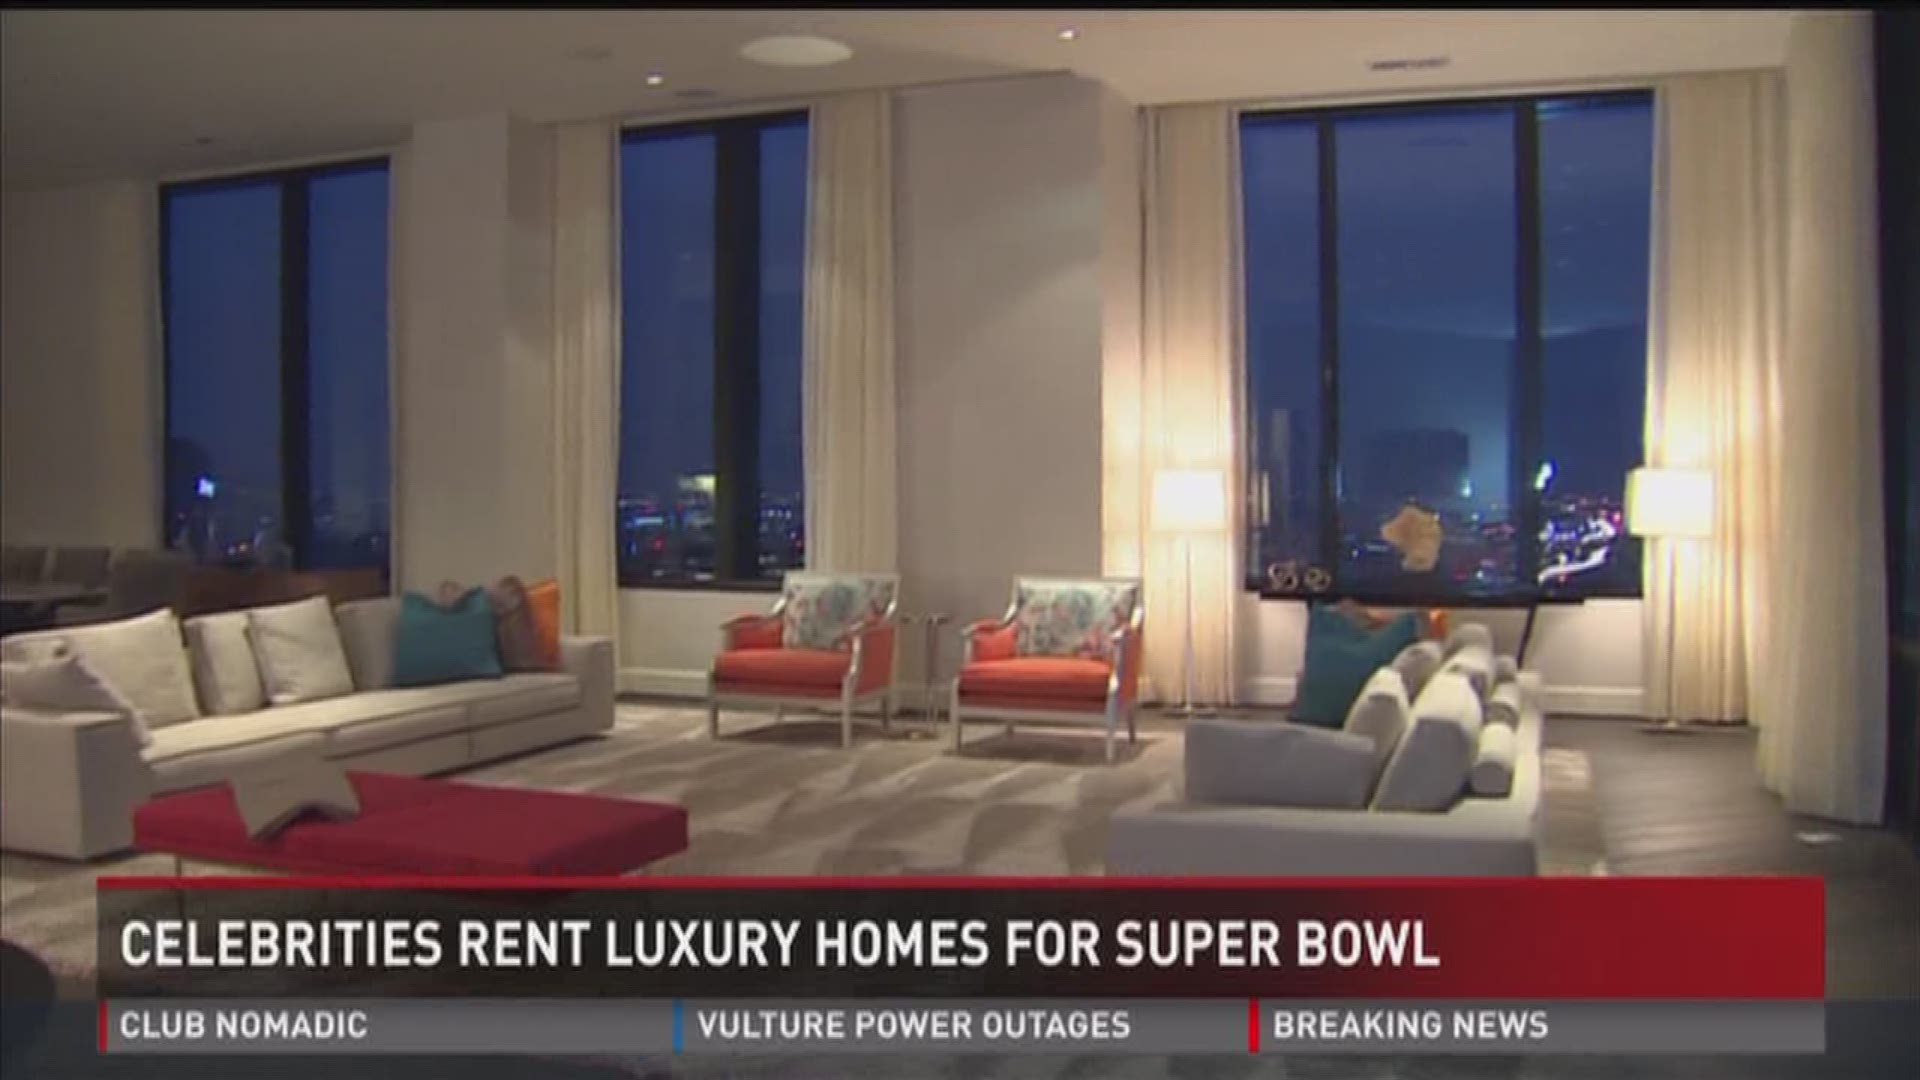 There's a big demand among the rich and famous to rent out high dollar homes instead of staying in hotels for the Super Bowl.